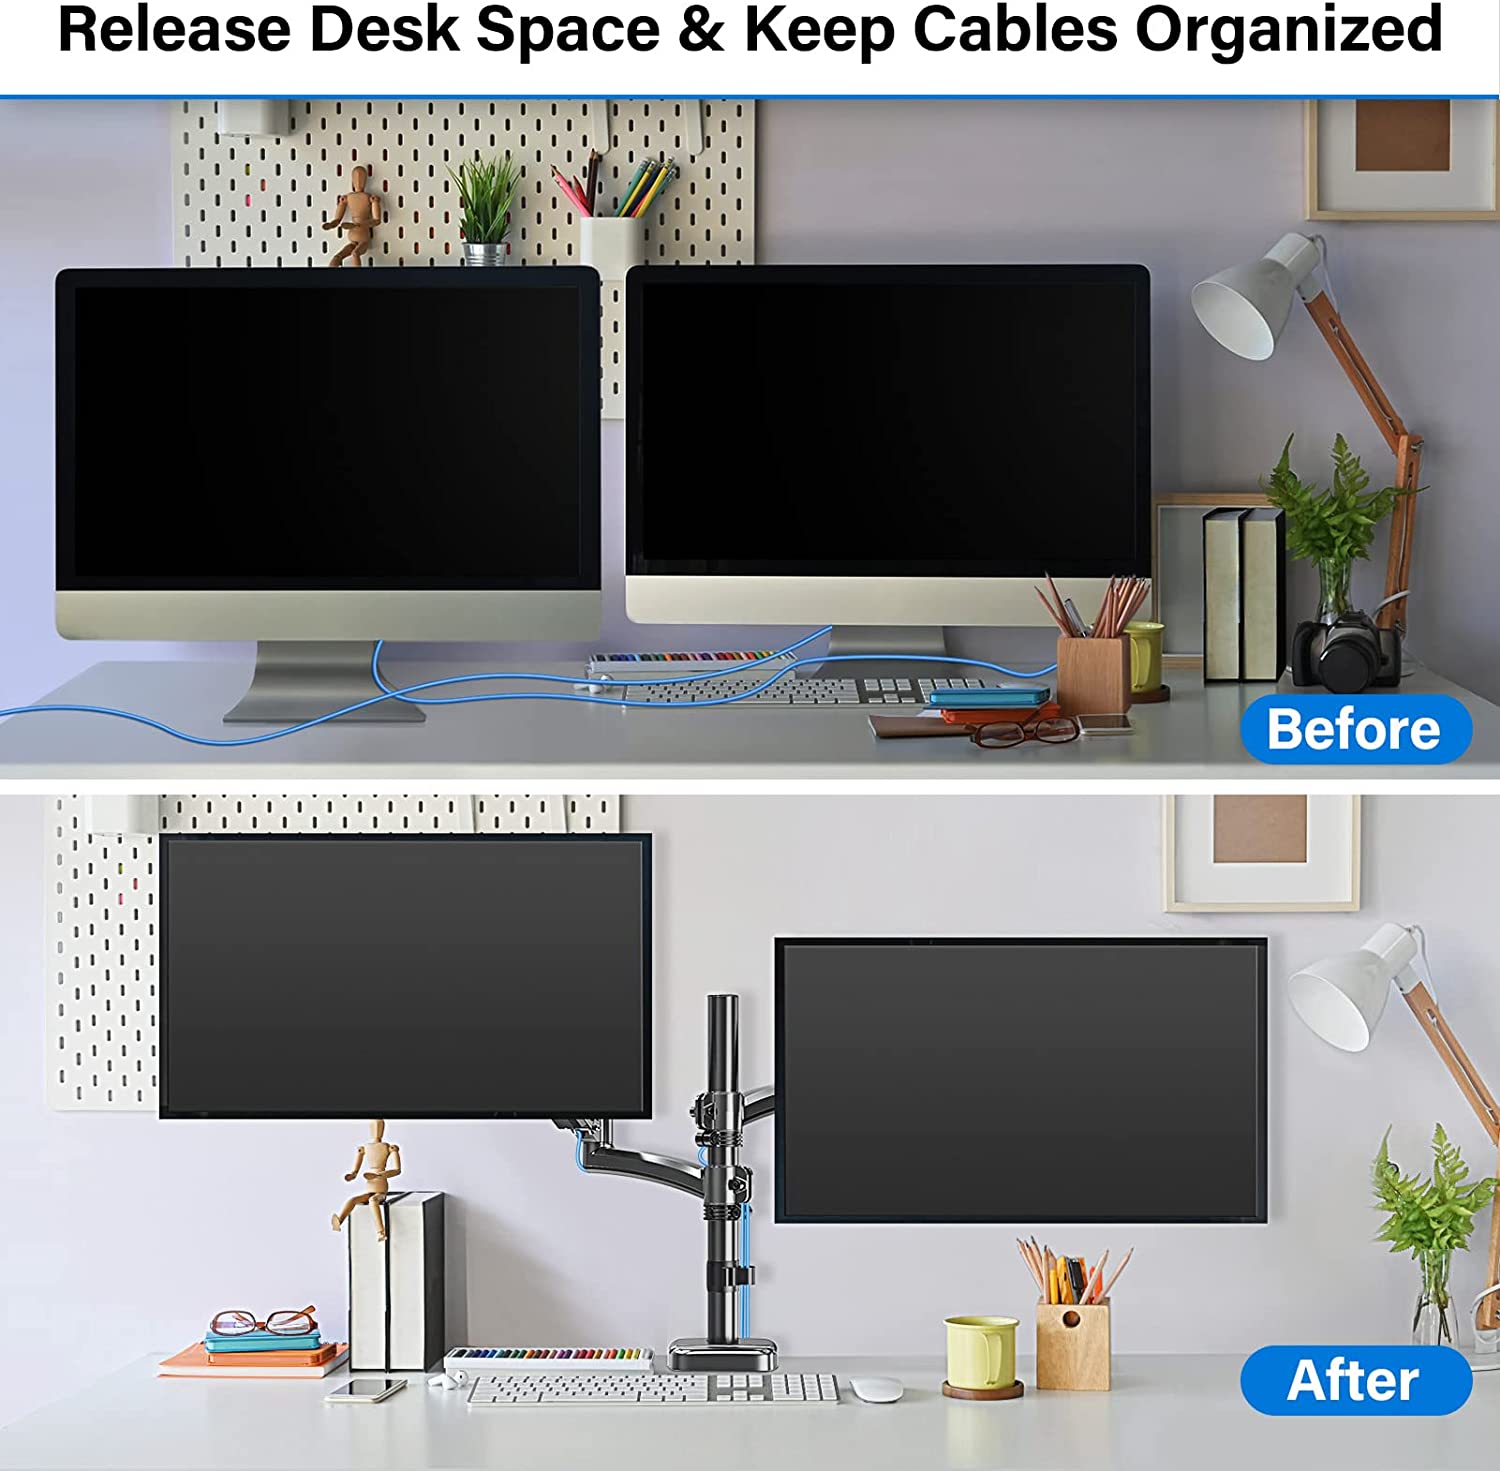 dual monitor arm release desk space and keep cables organized